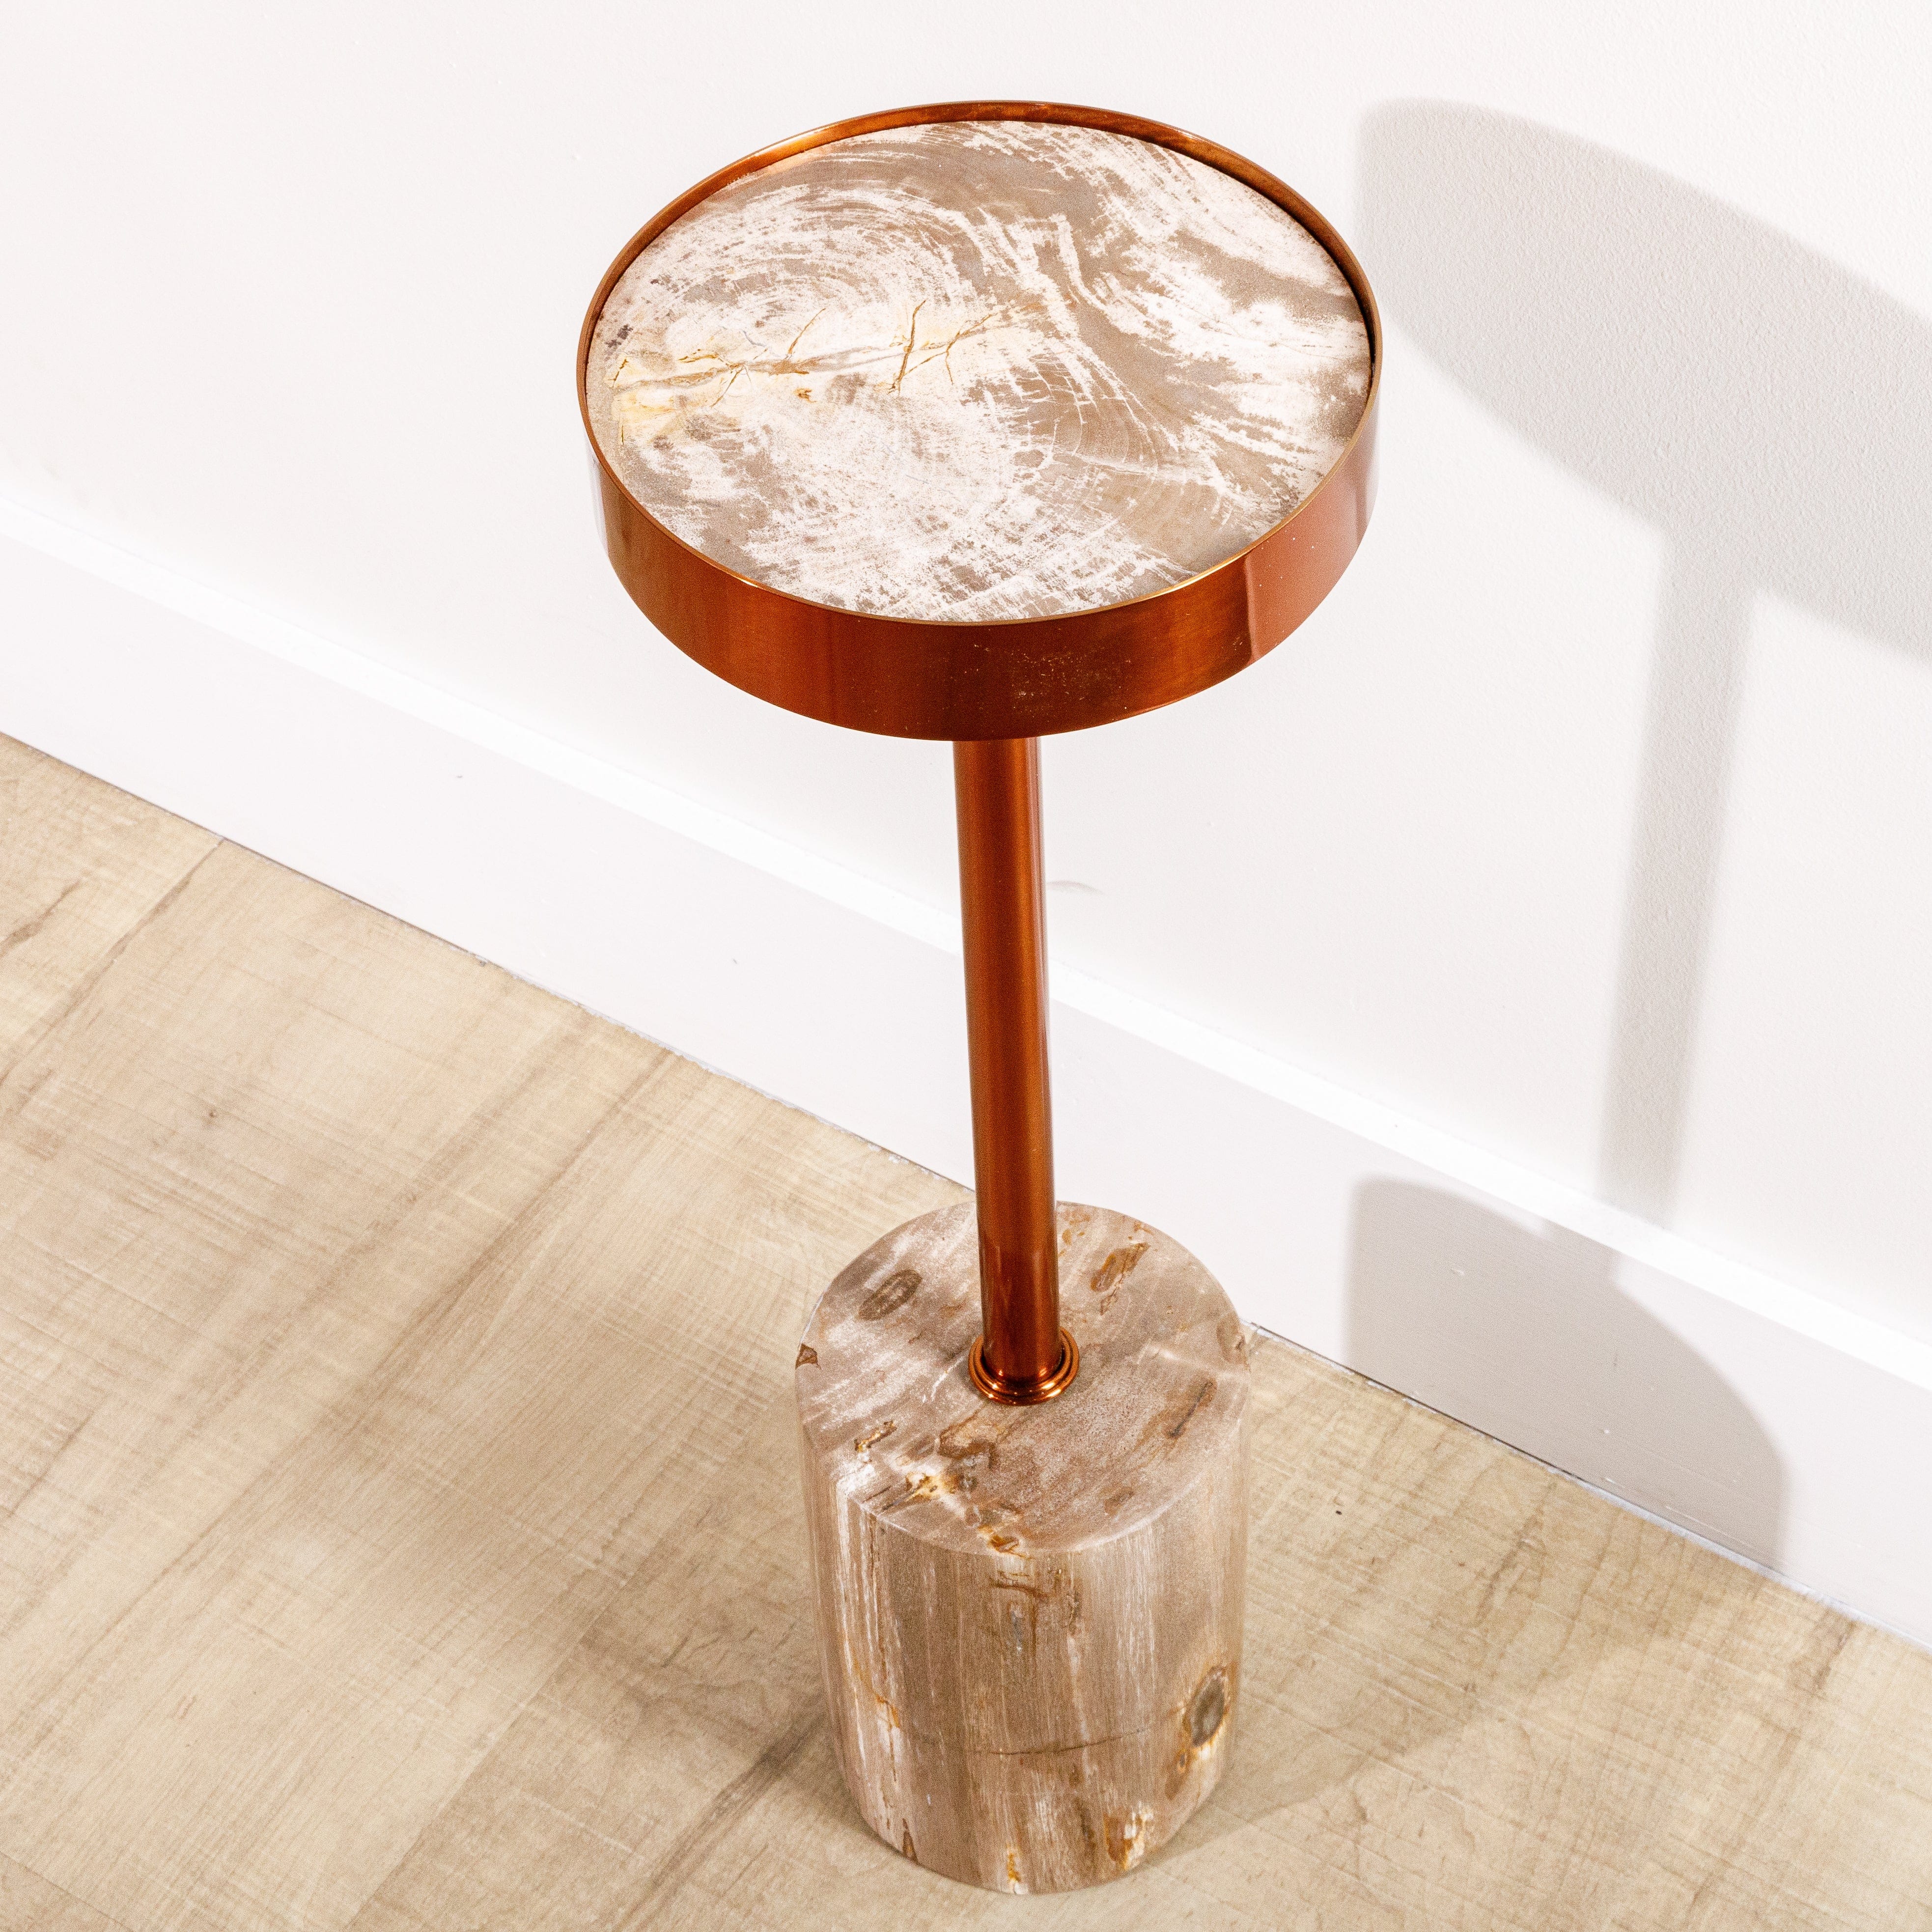 Kalifano Petrified Wood 25" Brown Petrified Wood Drink Table with Cylinder Base PWPS2000-BN